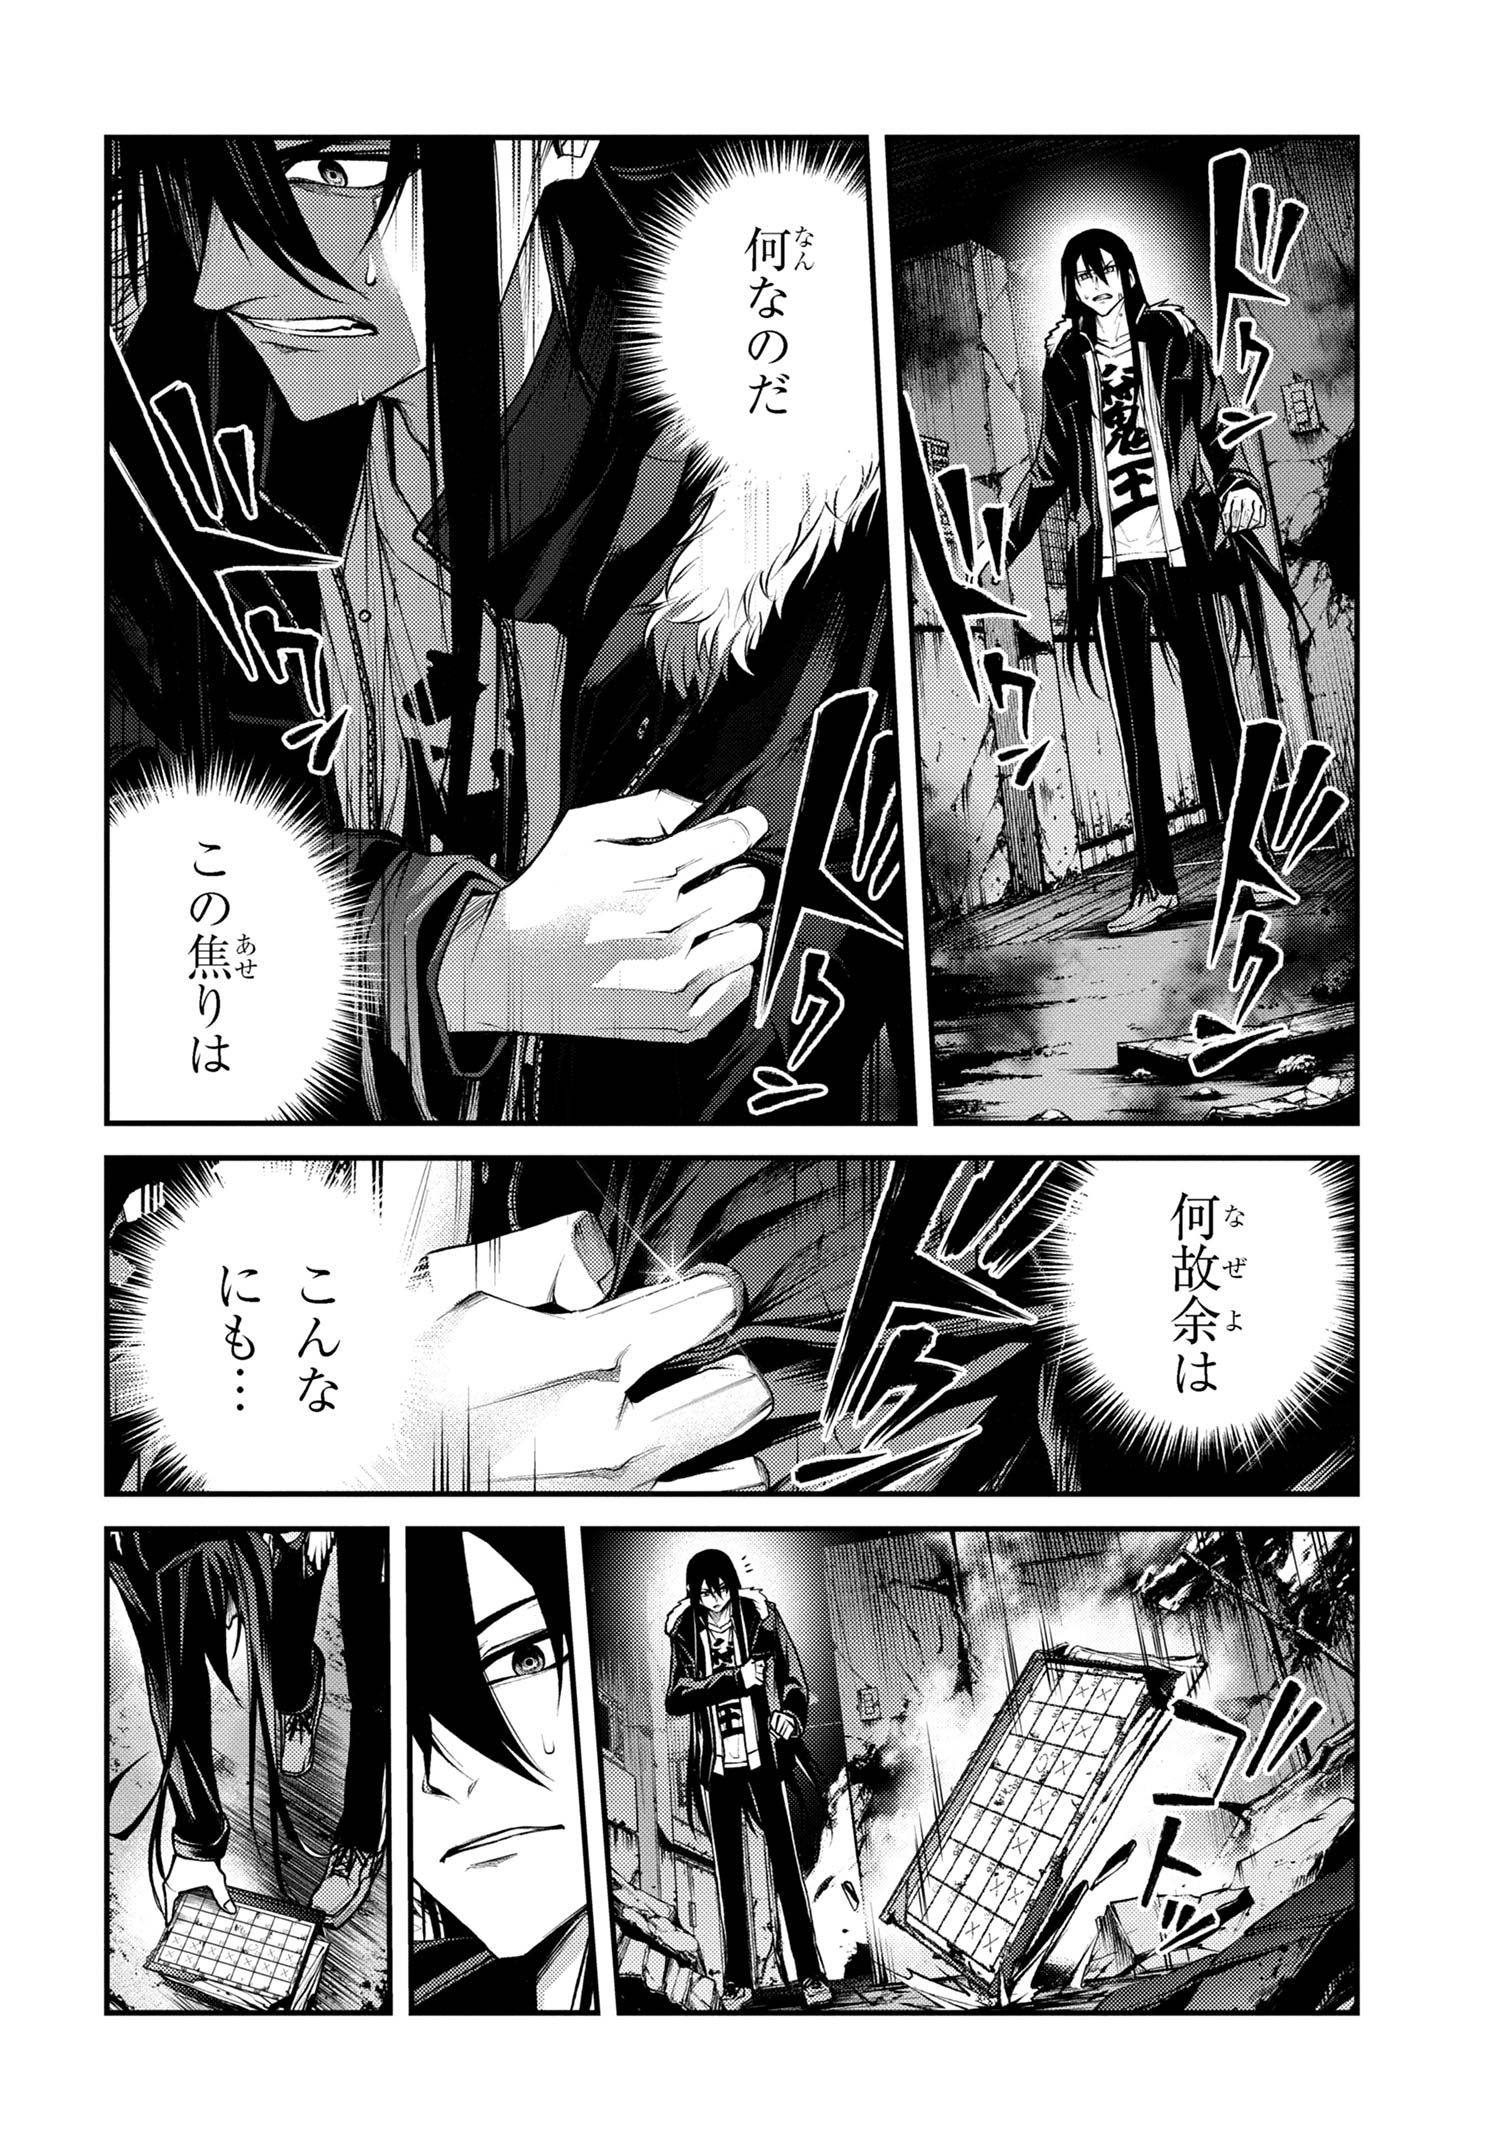 Maou 2099 - Chapter 8.3 - Page 3